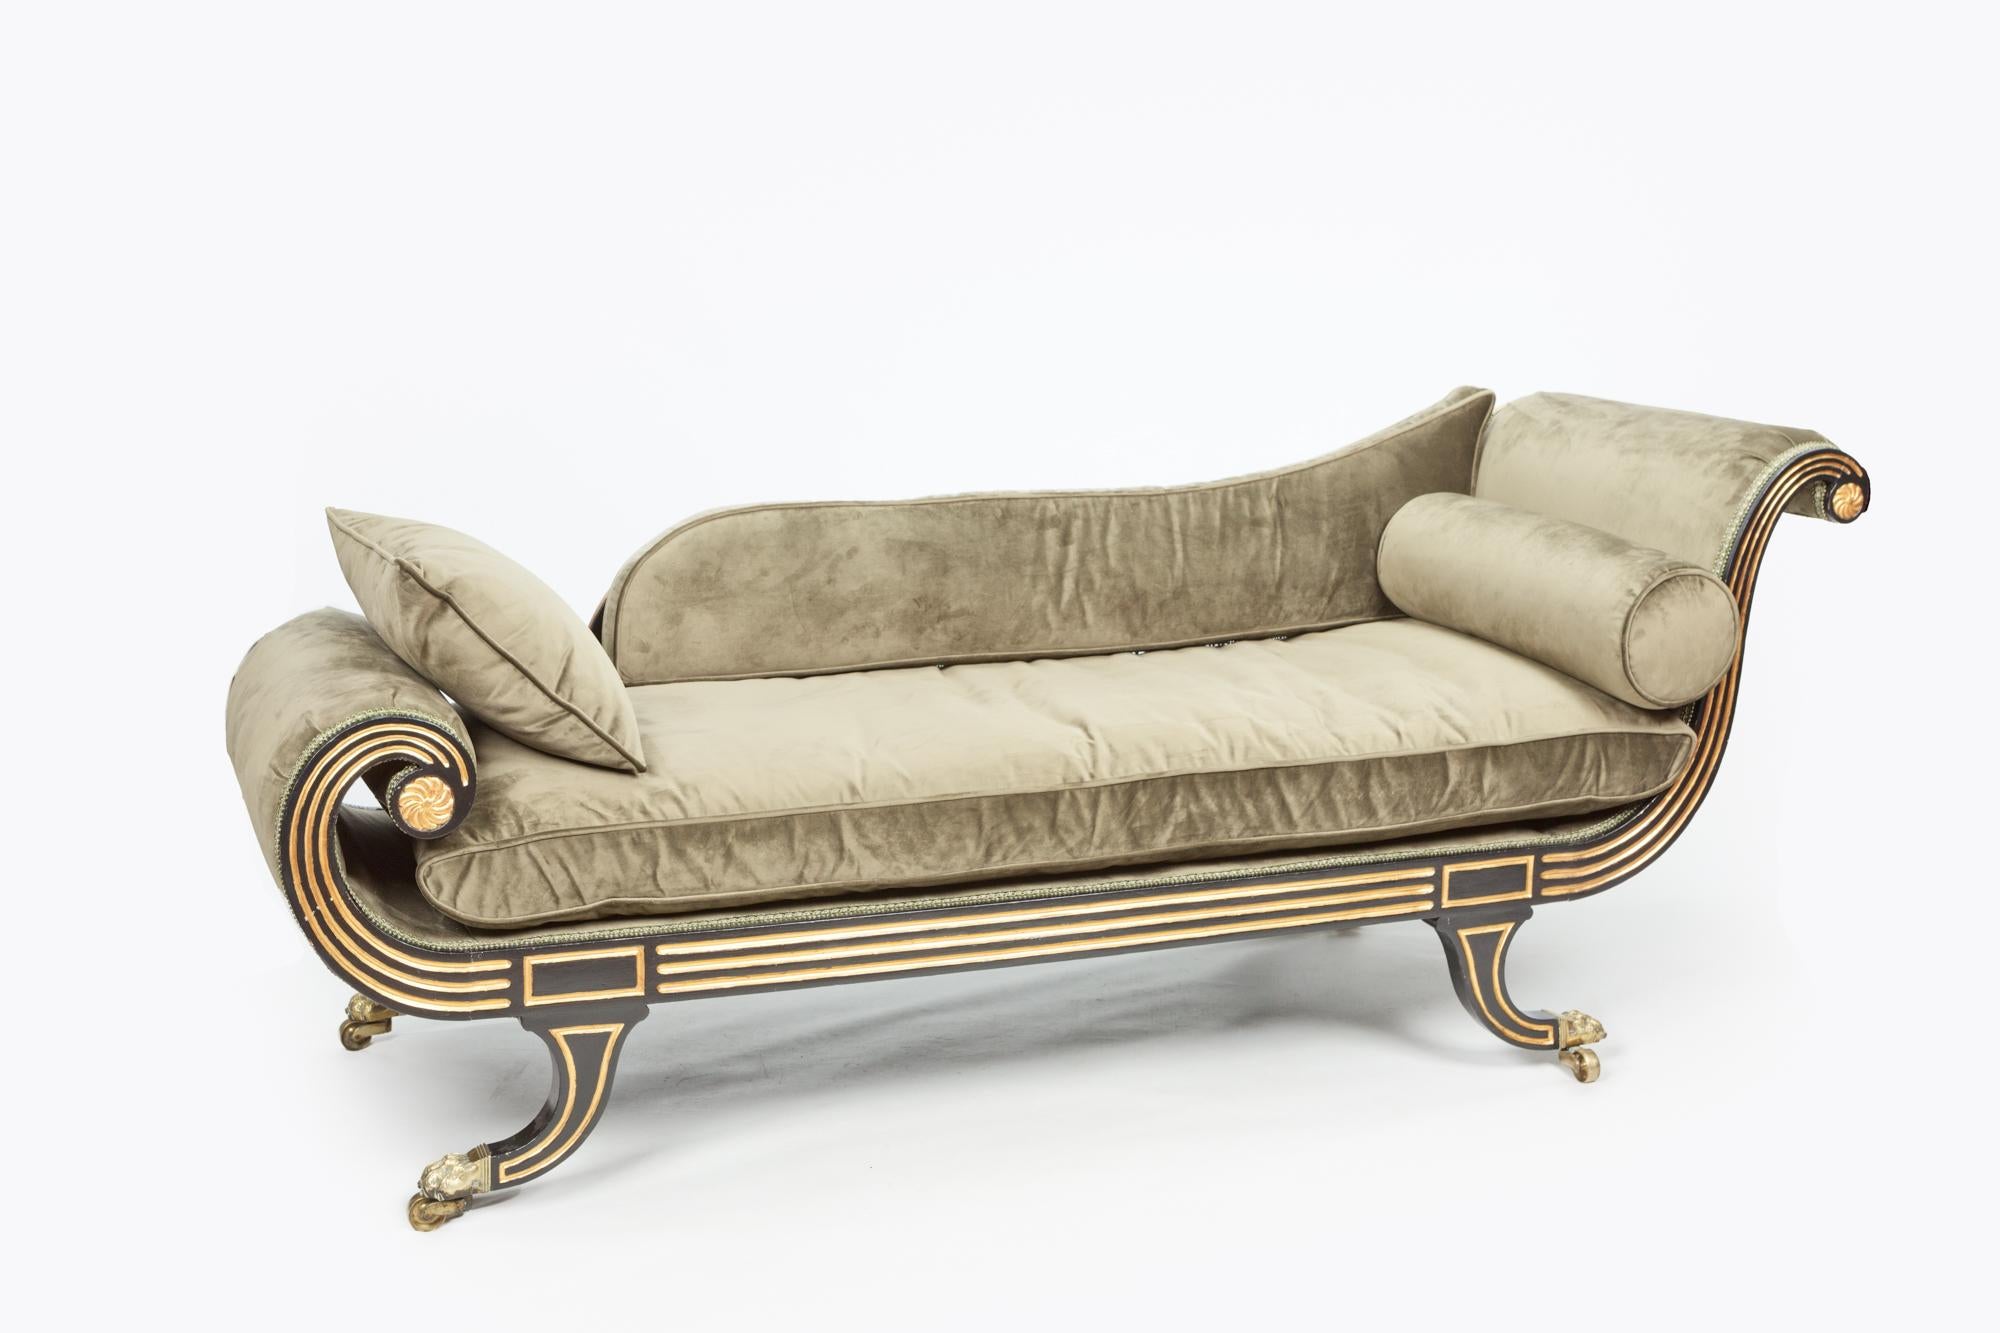 Fine Regency ebonized and gilt heightened chaise longue in the manner of Thomas Hope

Early 19th century Regency ebonised and gilt heightened chaise longue in the manner of Thomas Hope, the reeded show-wood frame with twin scroll ends with flower